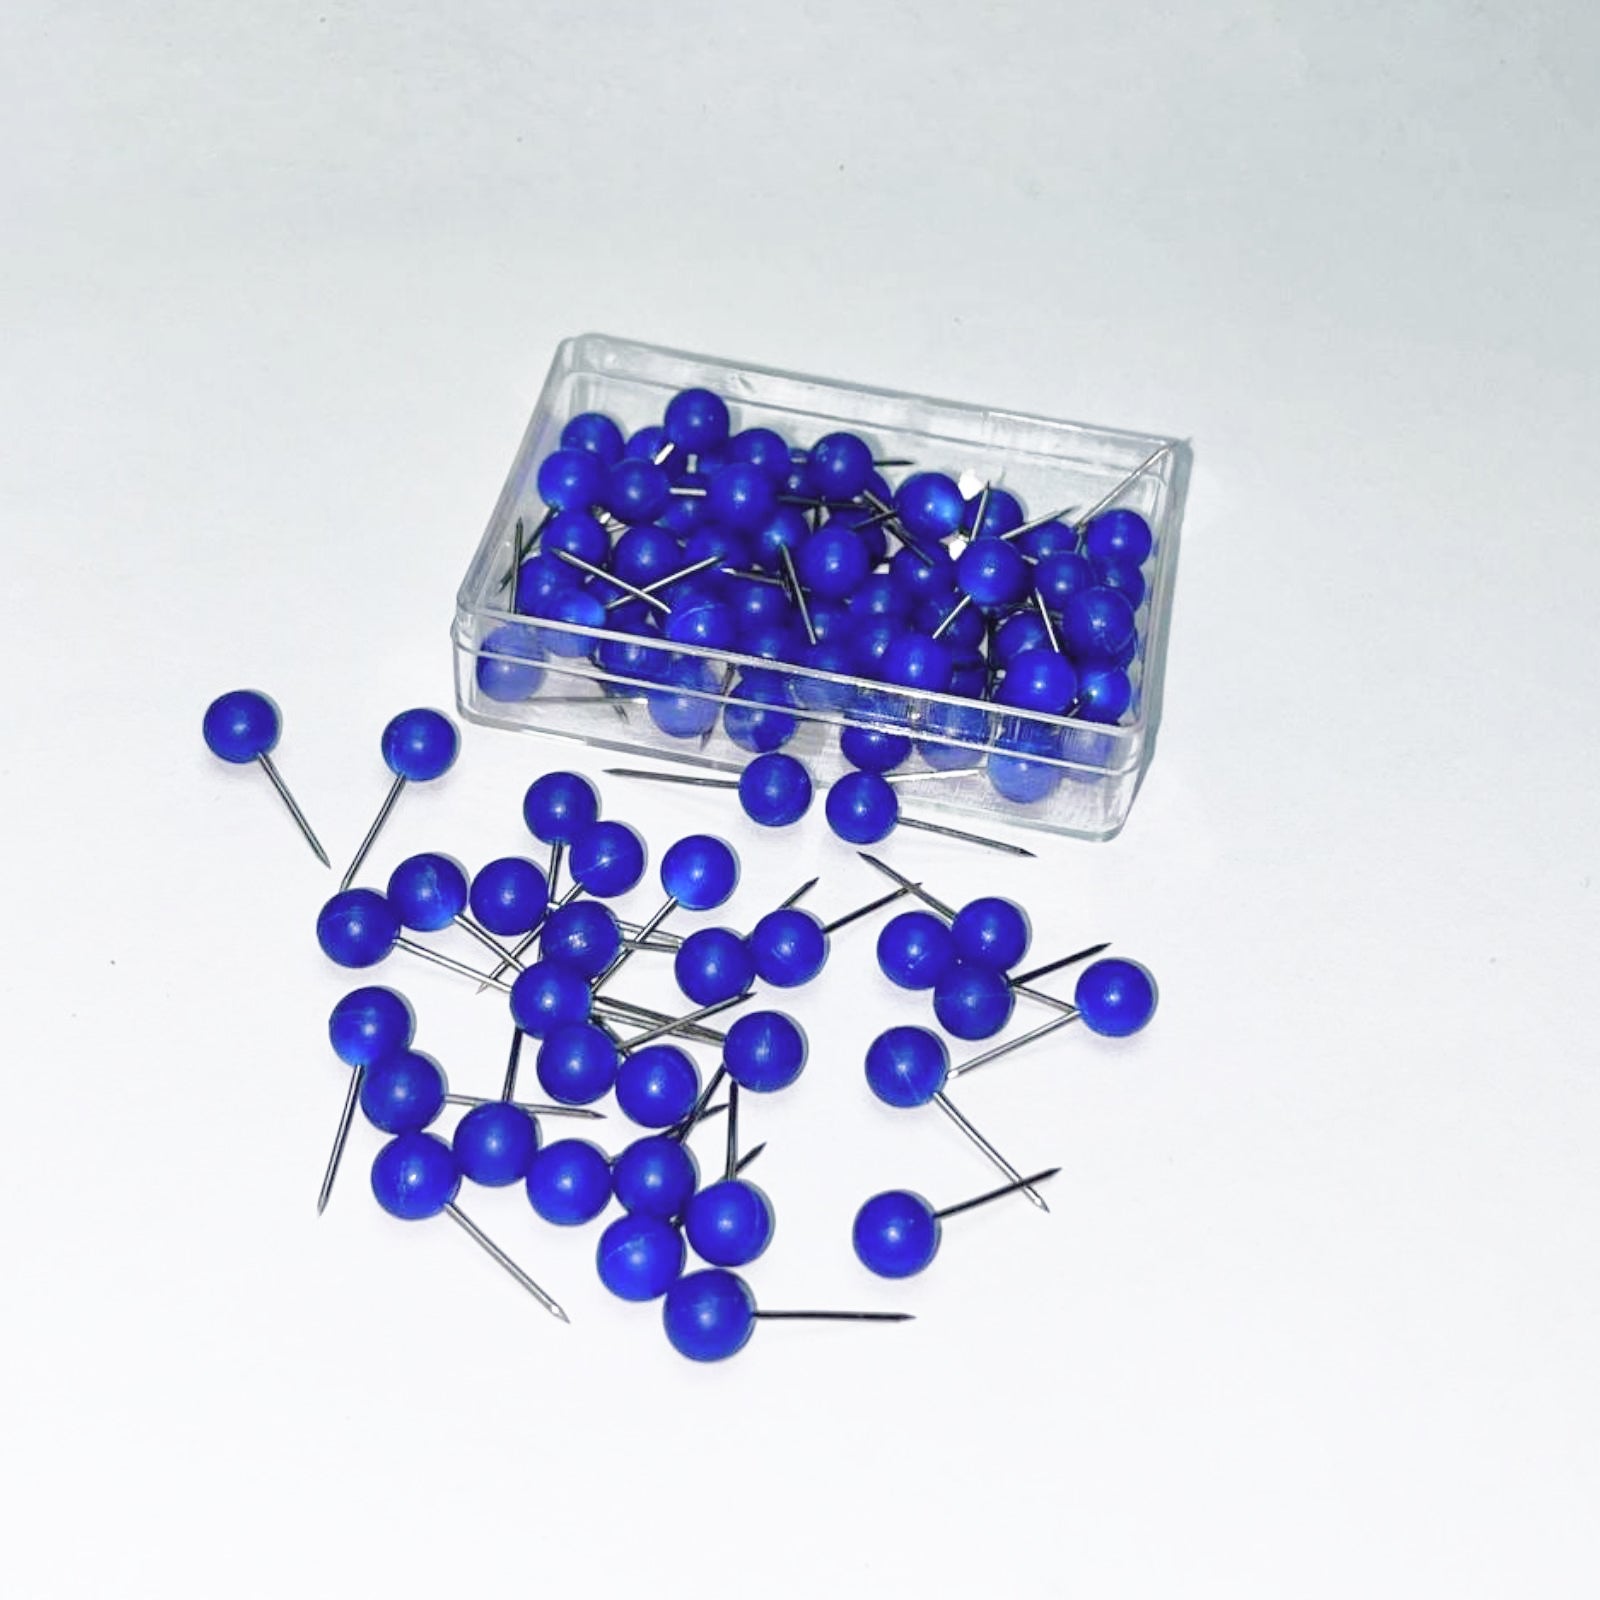 Blue Push Pins to mark travels